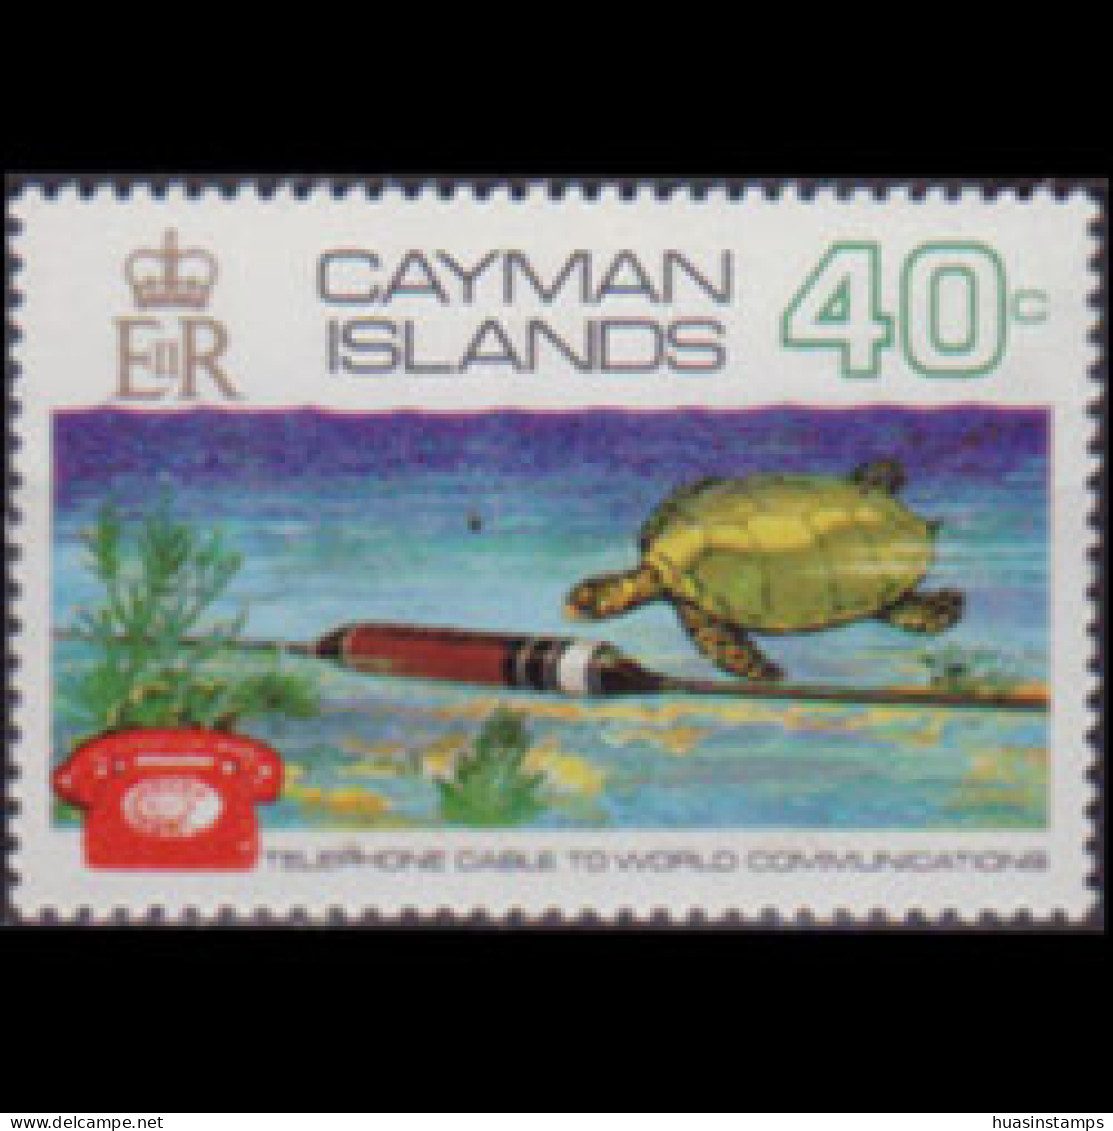 CAYMAN IS. 1972 - Scott# 299 Underwater Cable 40c MNH - Cayman (Isole)